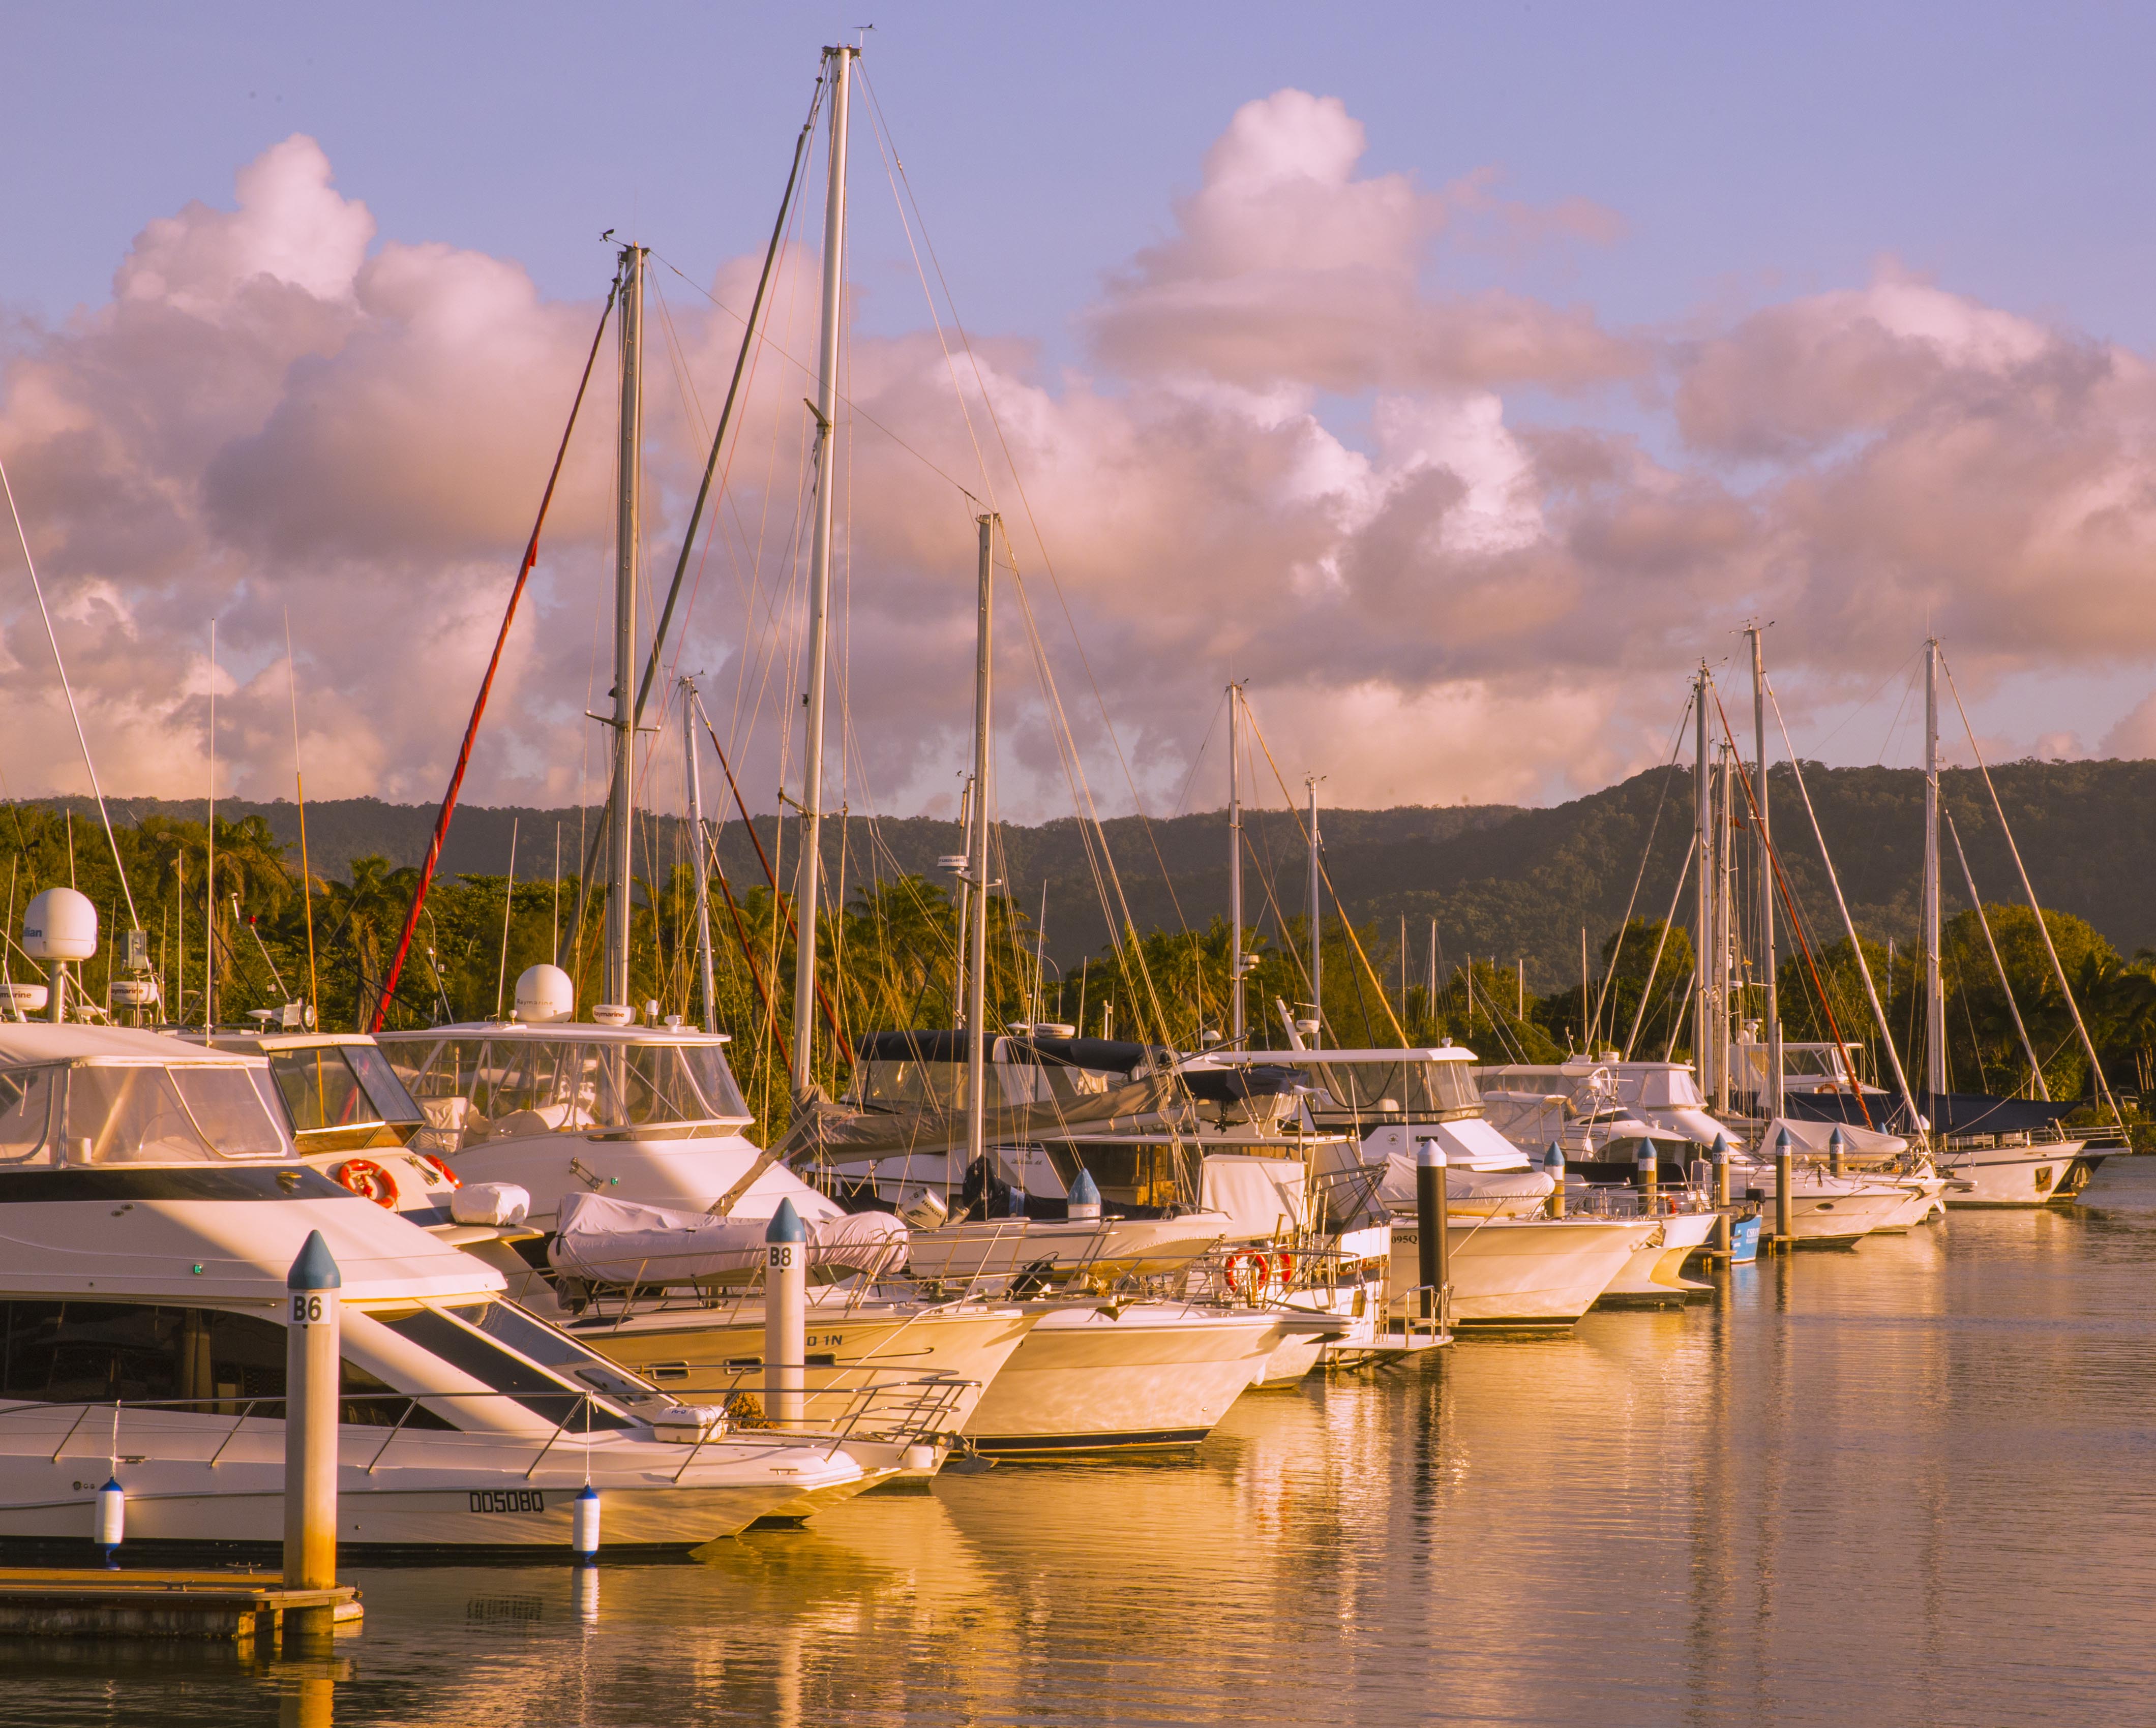 Port Douglas in the afternoon